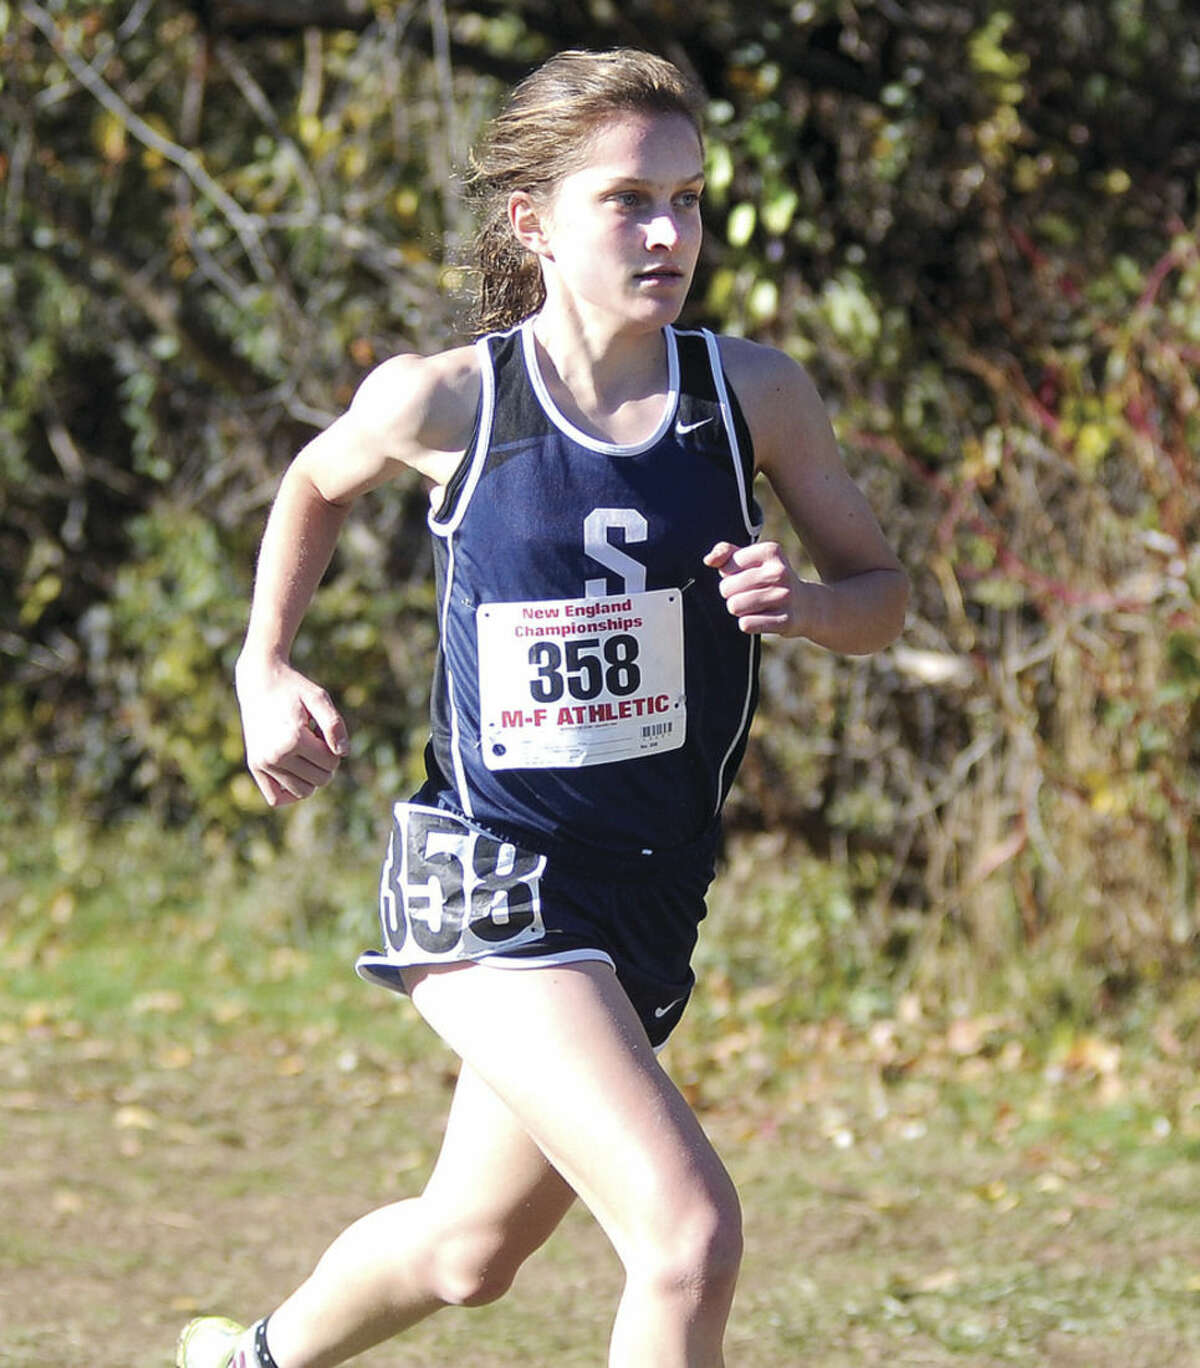 Hour photo/John Nash Staples High junior Hannah DeBalsi ran to her second straight New England cross country championship on Saturday at Wickham Park in Manchester.